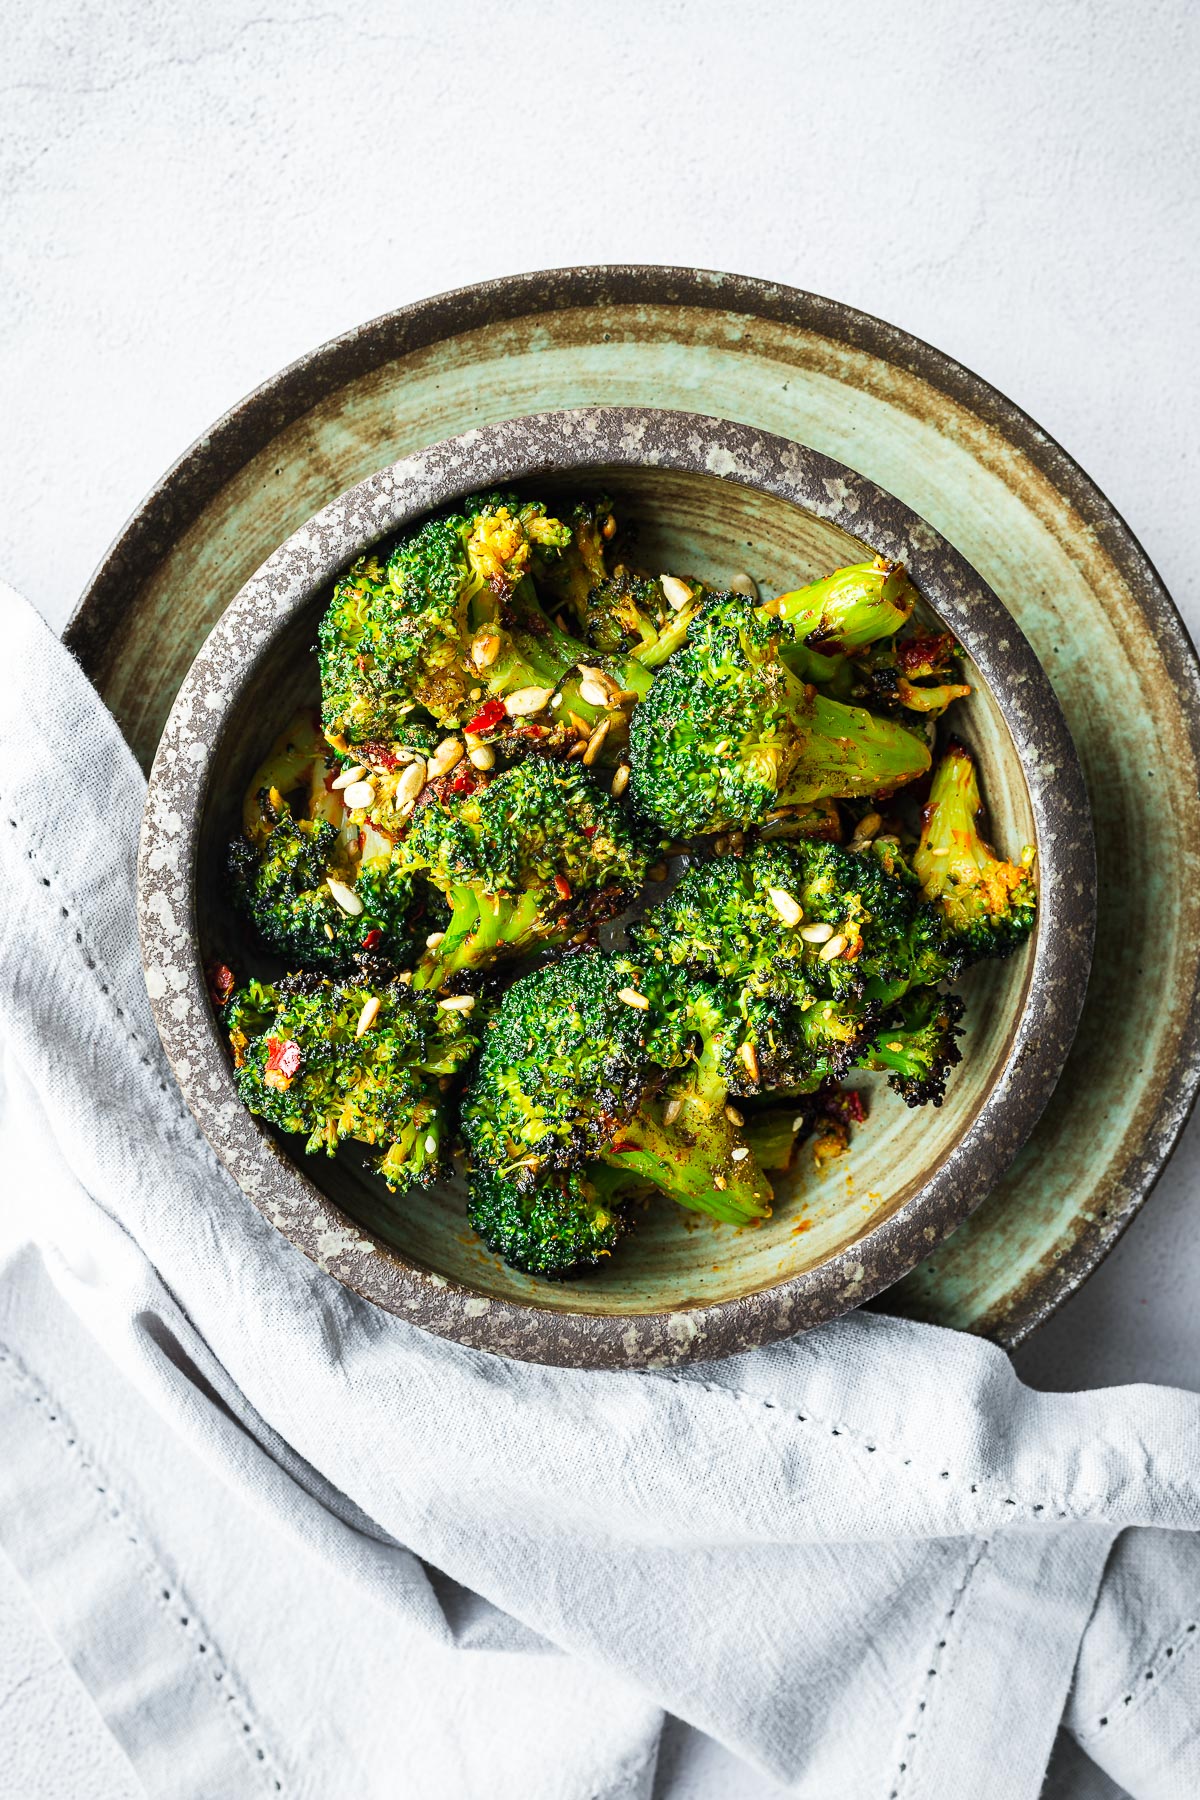 Oven-roasted frozen broccoli with harissa oil and sunflower seeds in a brown ceramic bowl.